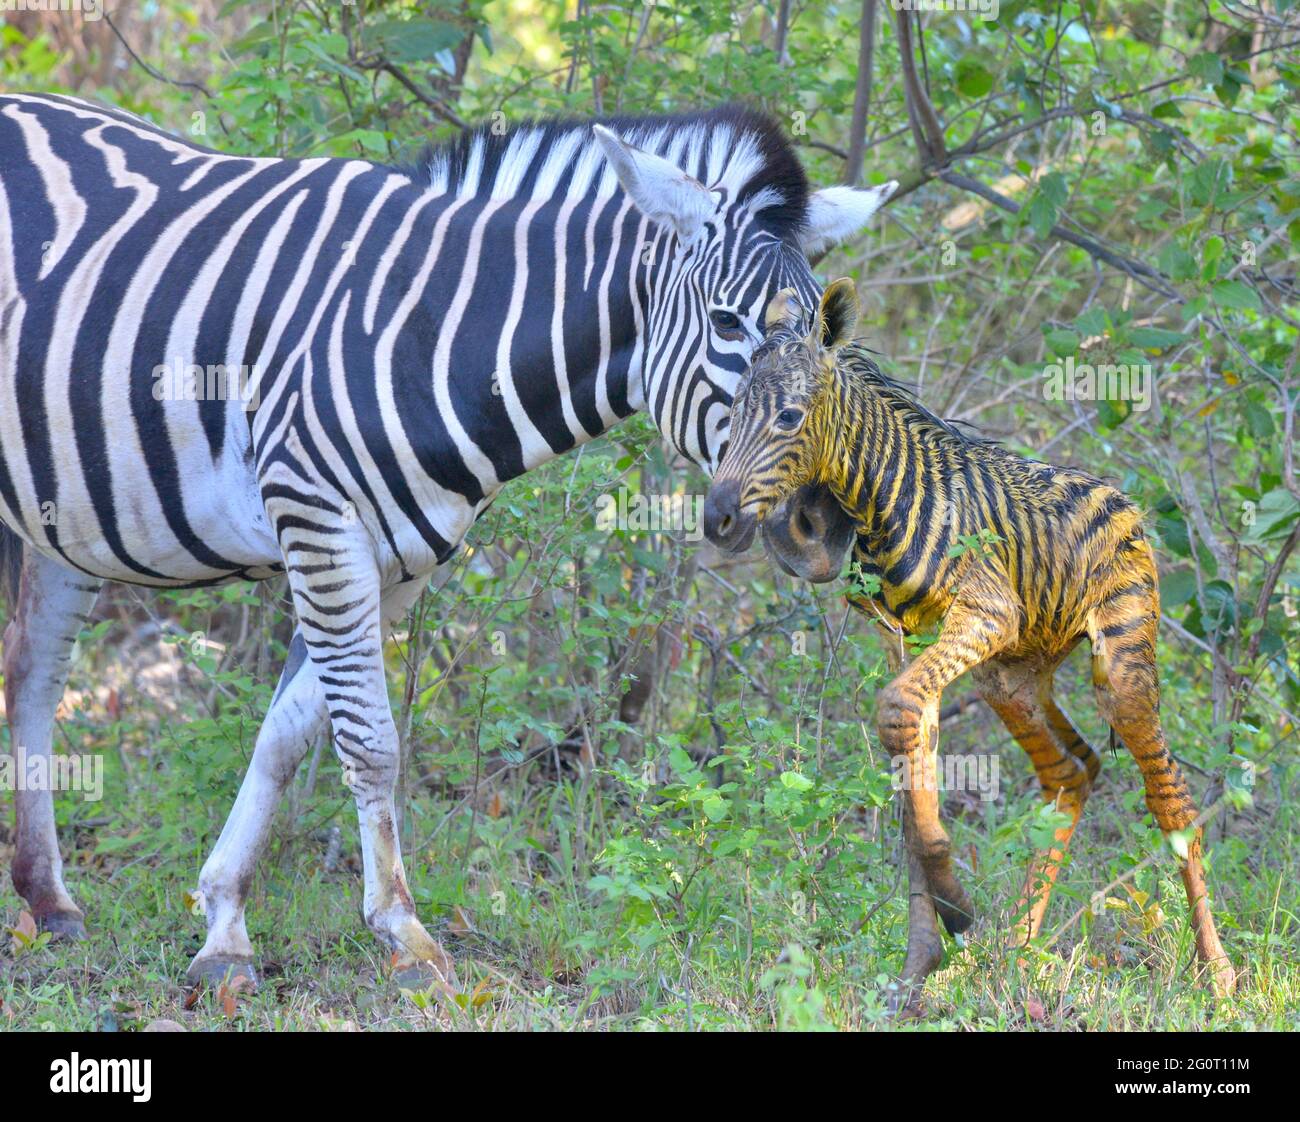 Natural life in Africa. Newborn baby zebra foal still wet and shiny. With mom. Stock Photo